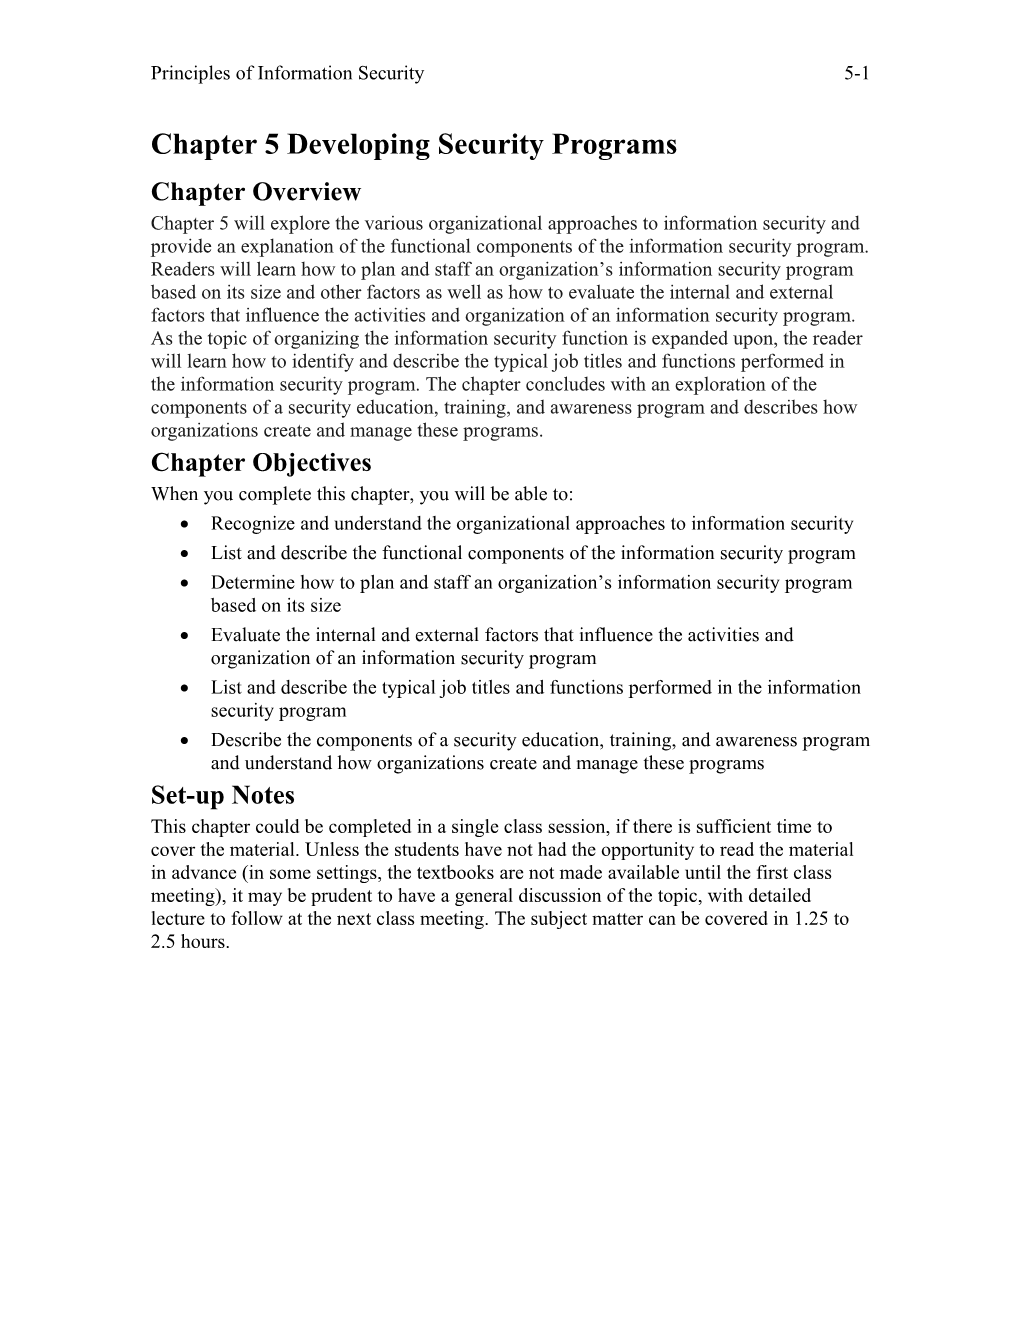 Chapter 5 Developing Security Programs